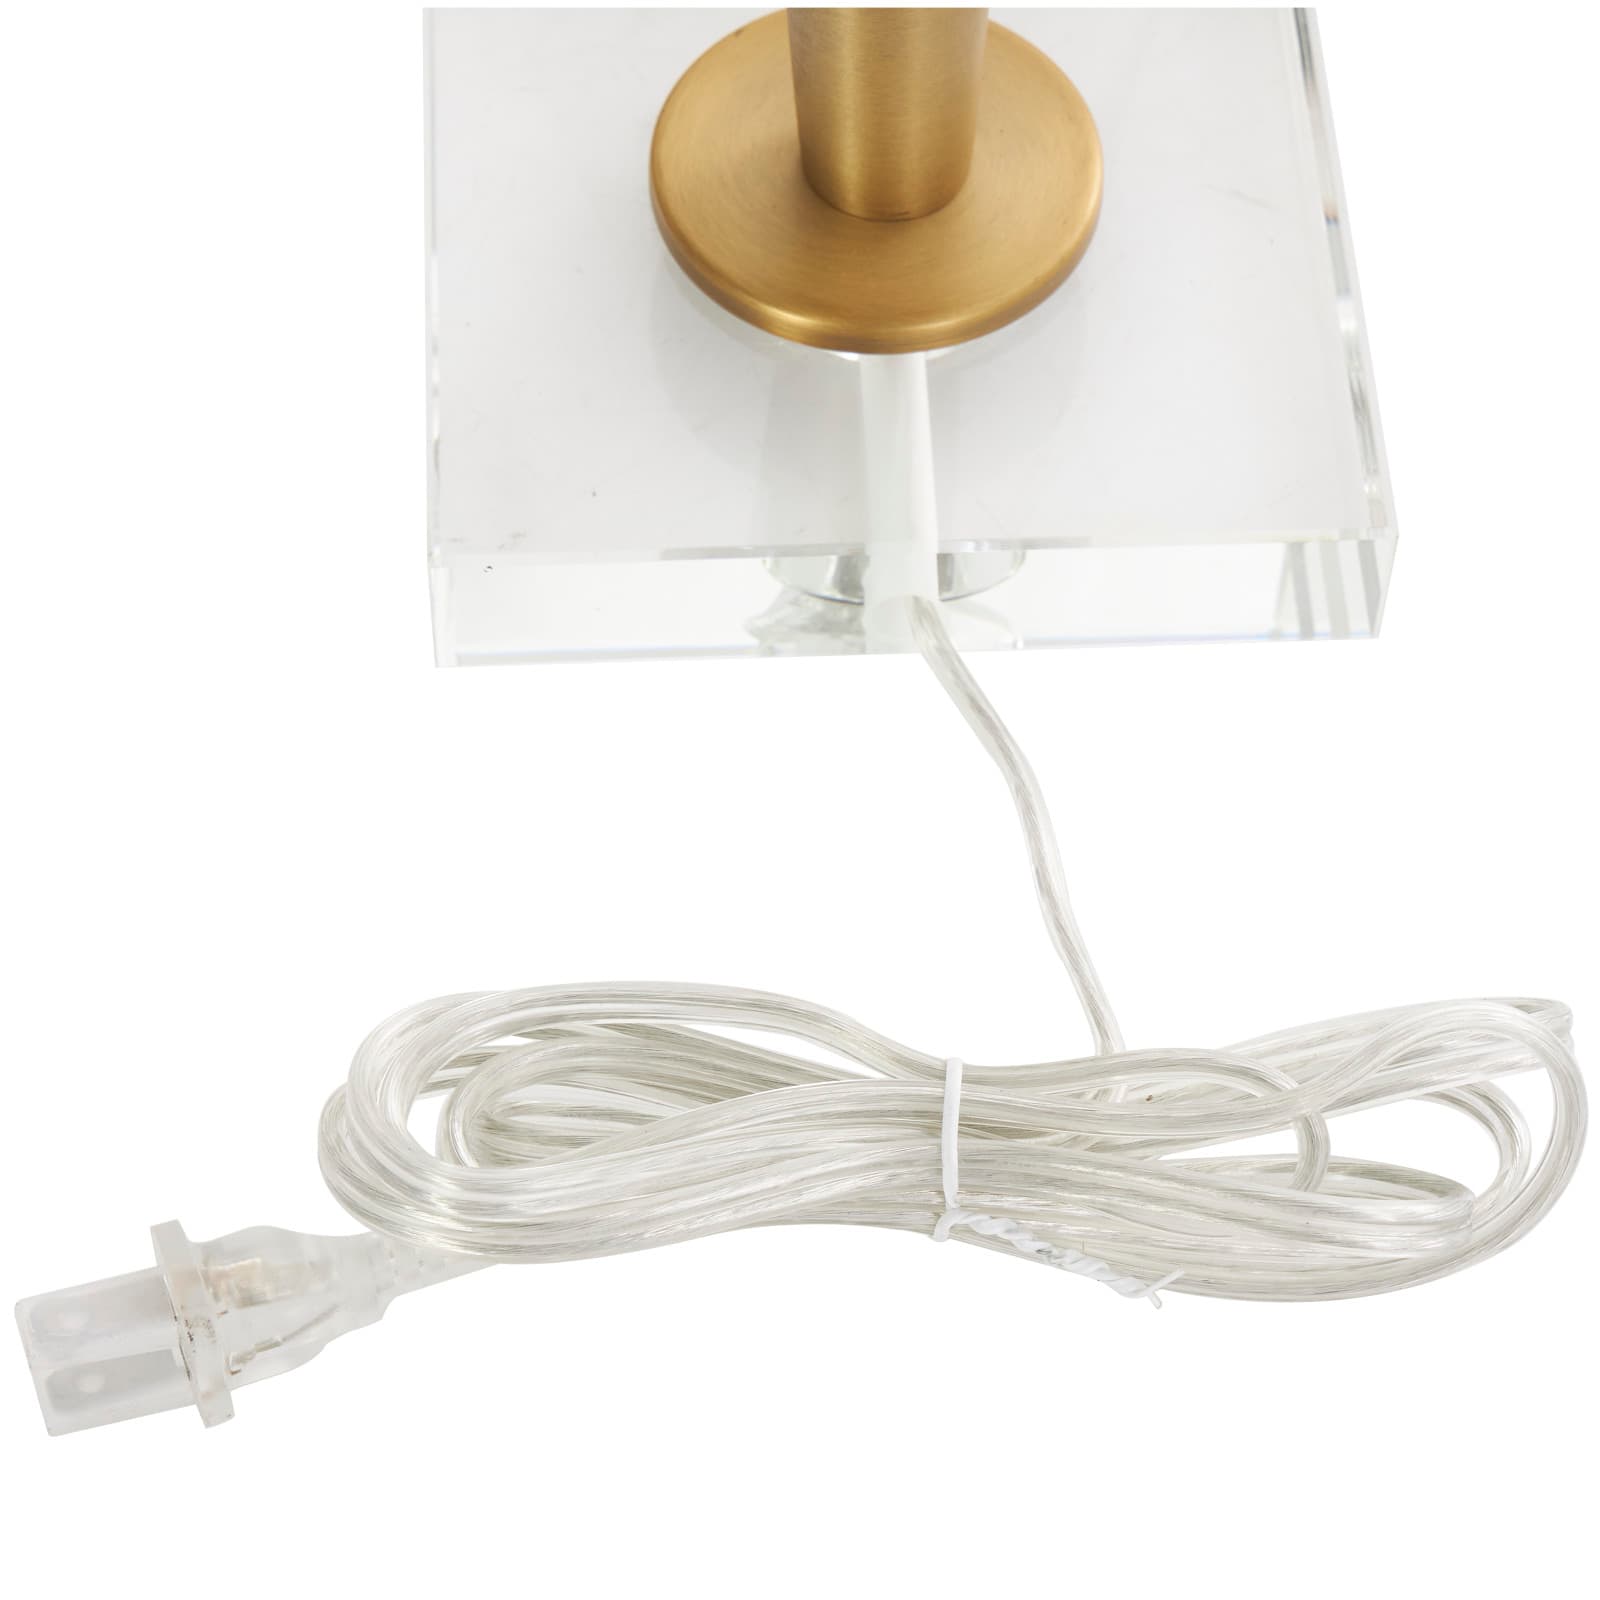 2ft. Gold Metal Inverted Cone Shaped Accent Lamp